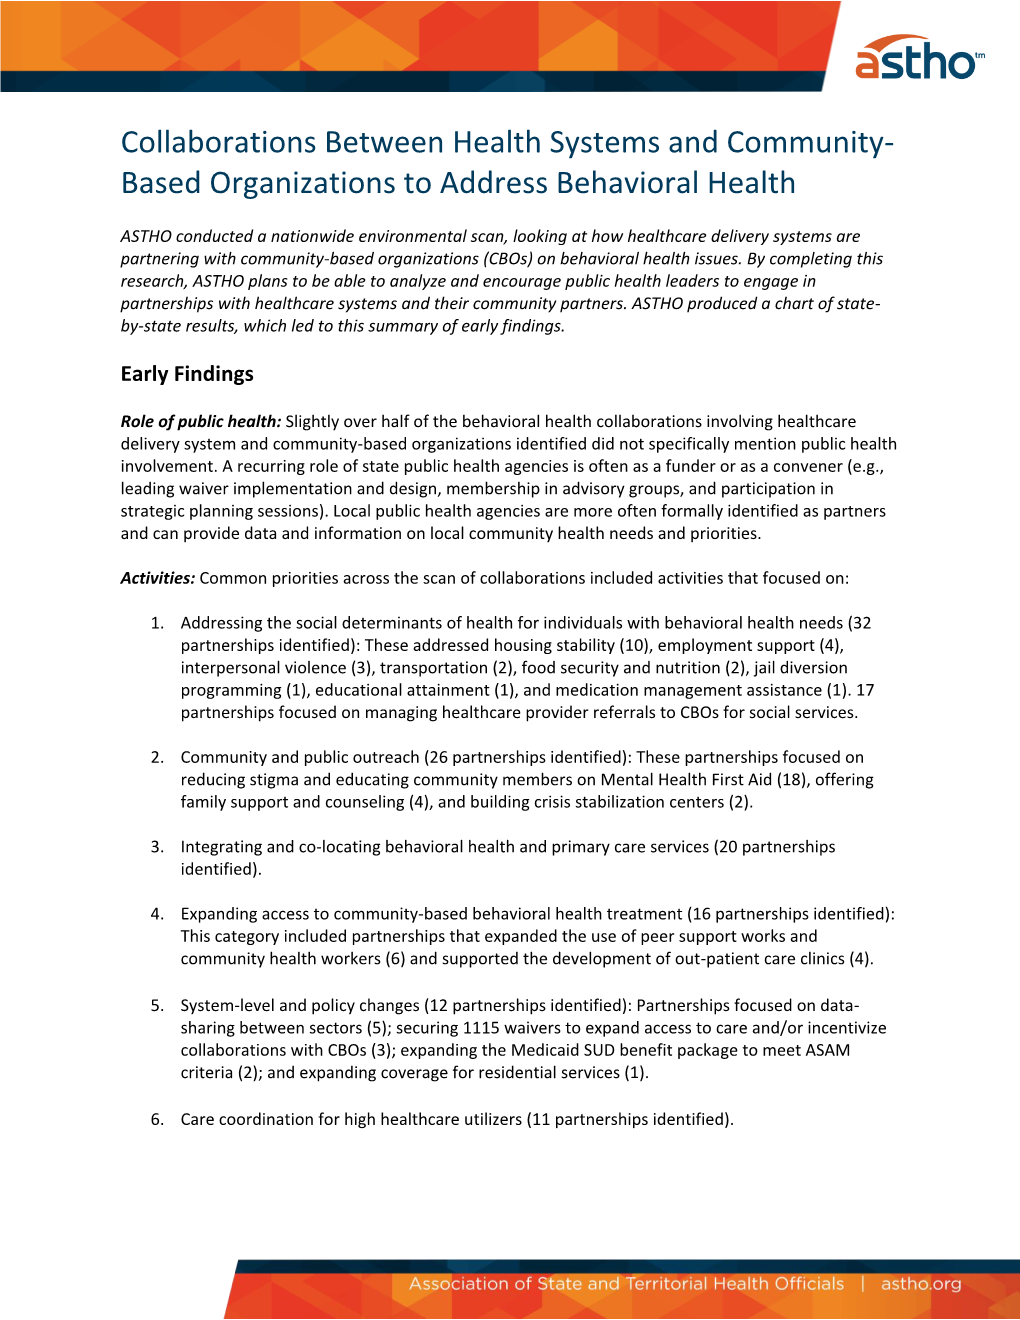 Collaborations Between Health Systems and Community-Based Organizations to Address Behavioral Health